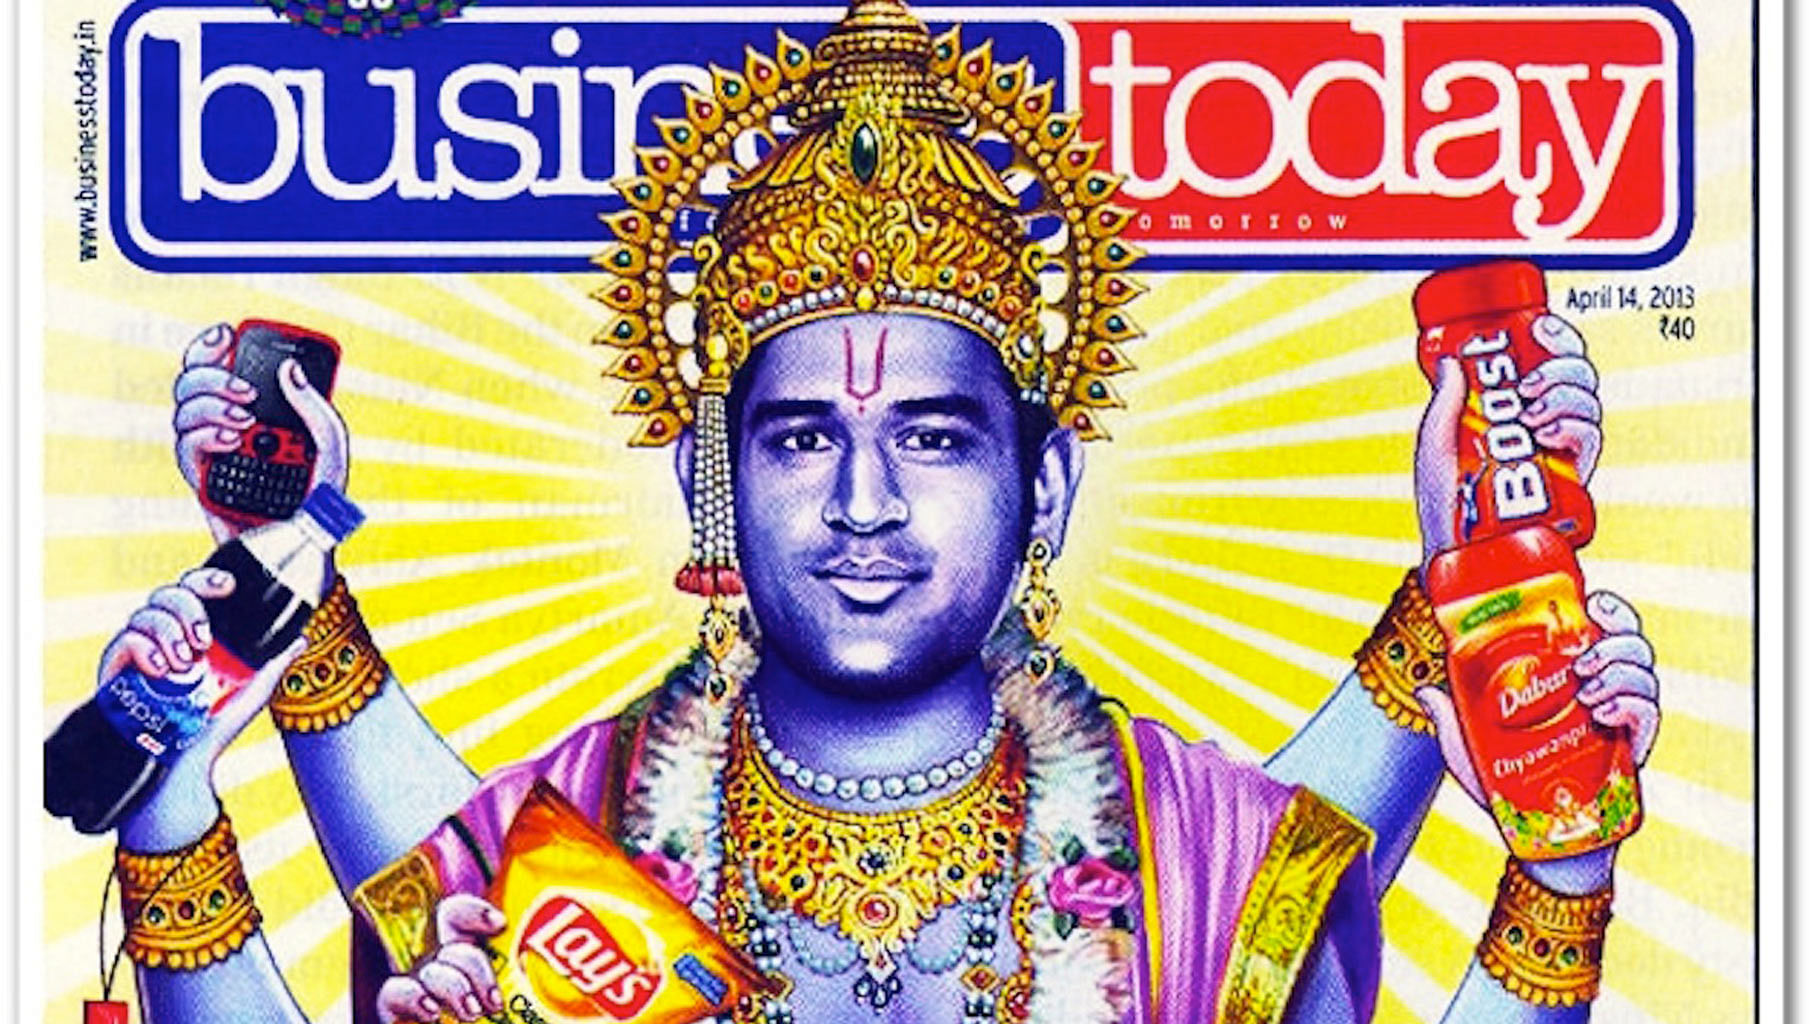 Indian skipper Mahendra Singh Dhoni. (Photo: <i>Business Today</i> Cover)